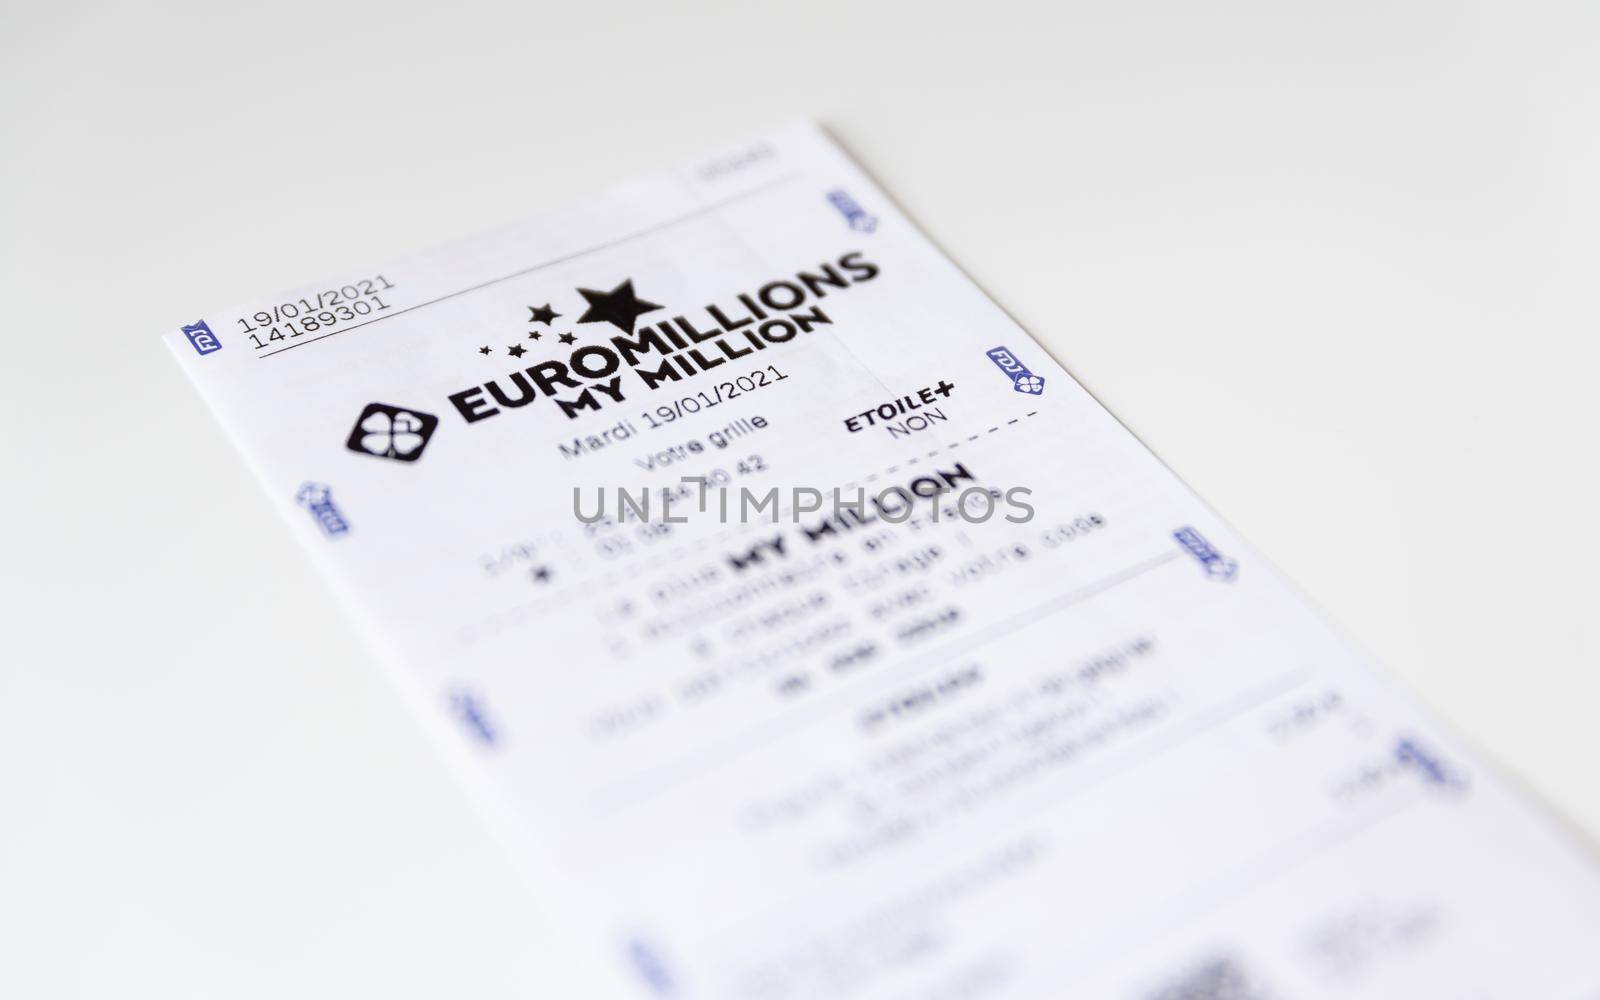 BAYONNE, FRANCE - CIRCA JANUARY 2021: Francaise des Jeux Euromillions receipt on white background. EuroMillions is a European transnational lottery, it was launched in 2004.